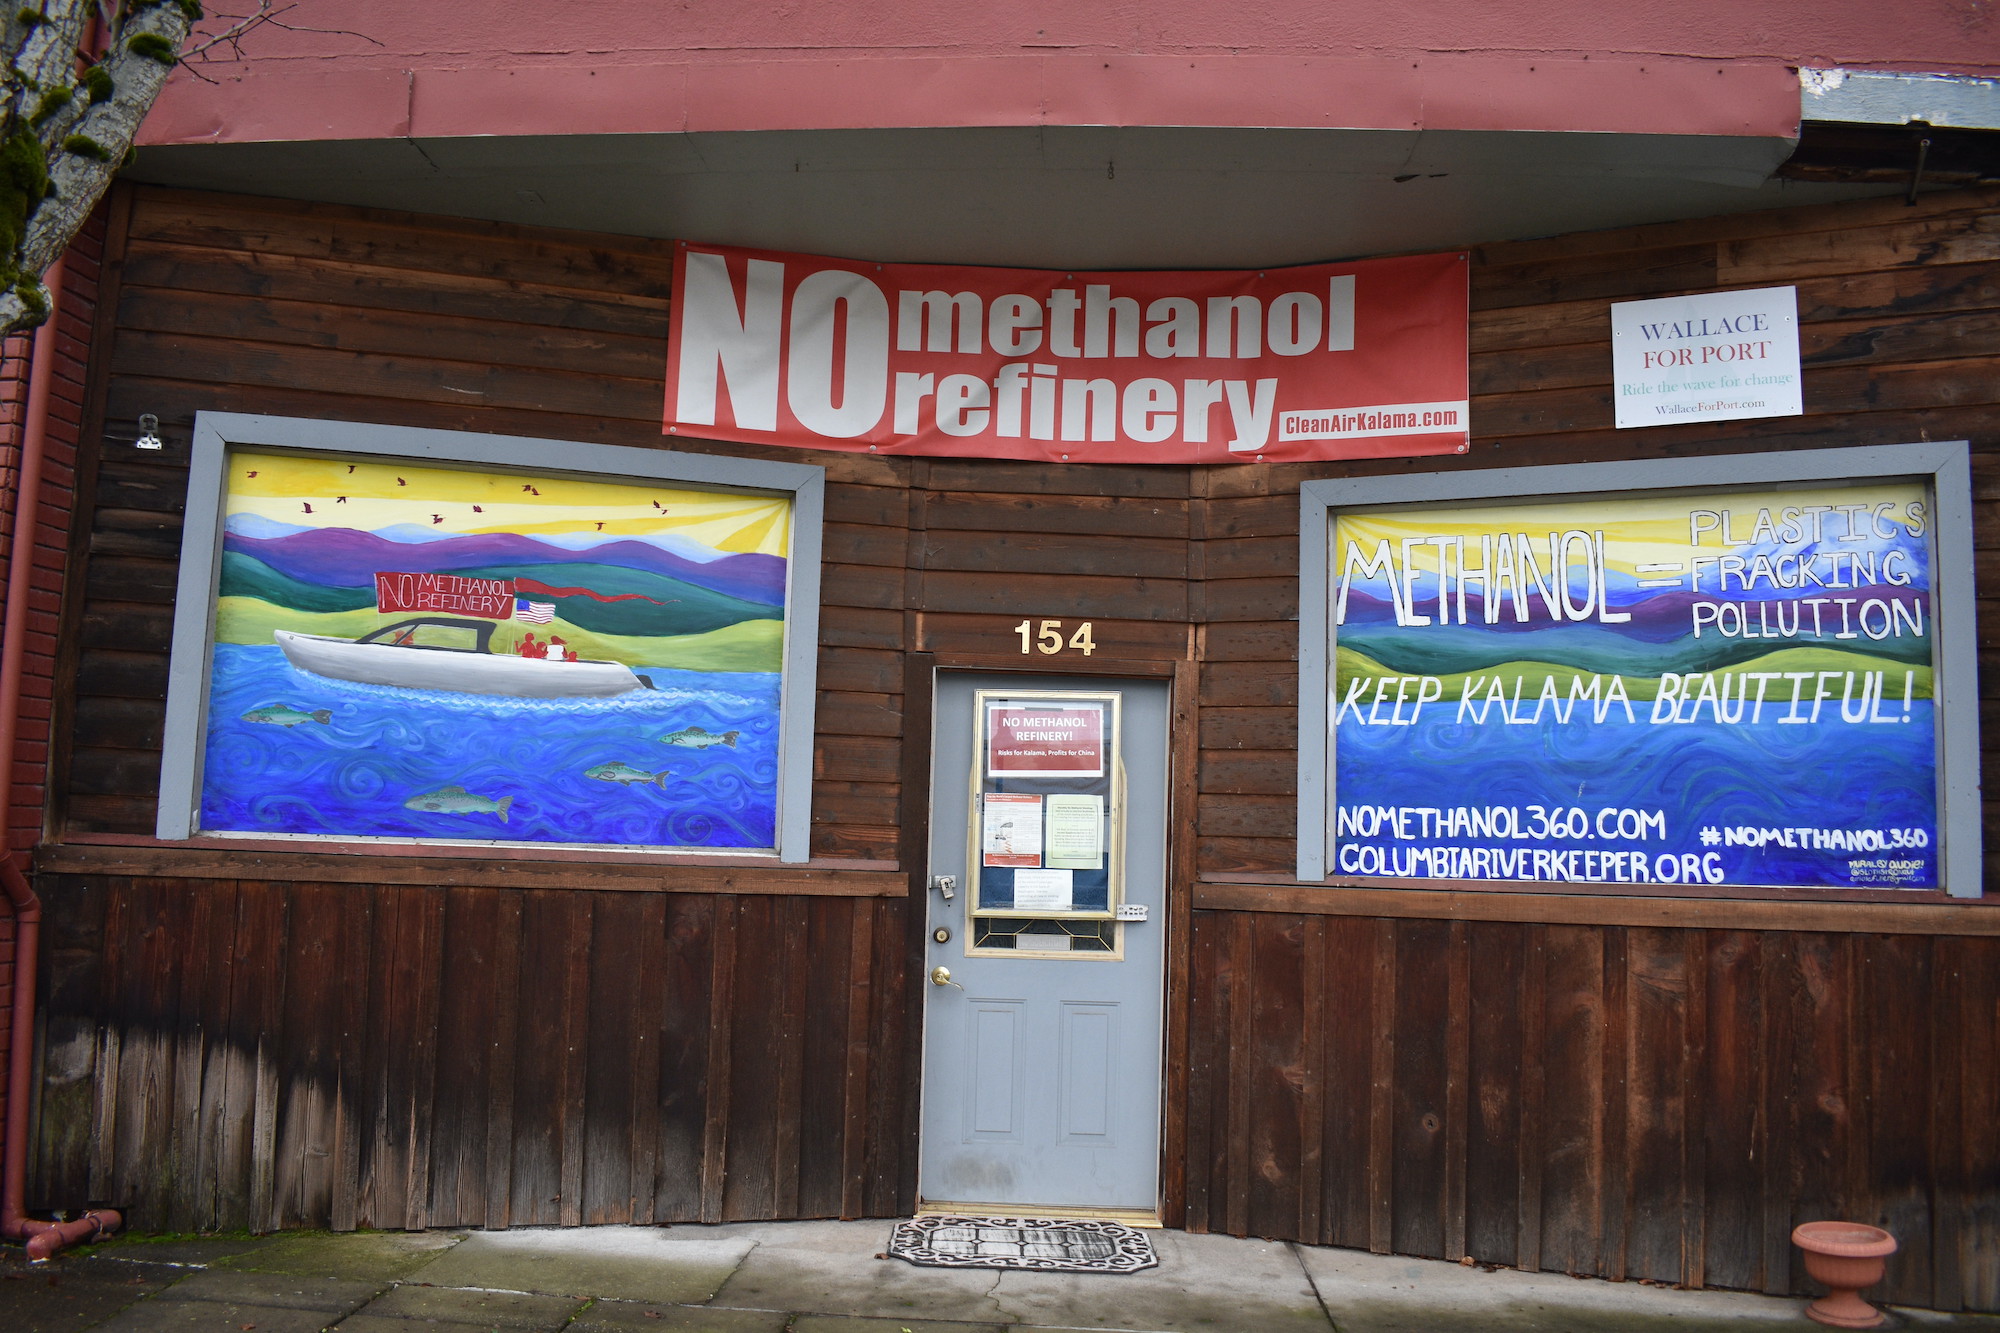 Building front displaying signs and artwork opposing NWIW's Kalama methanol refinery.